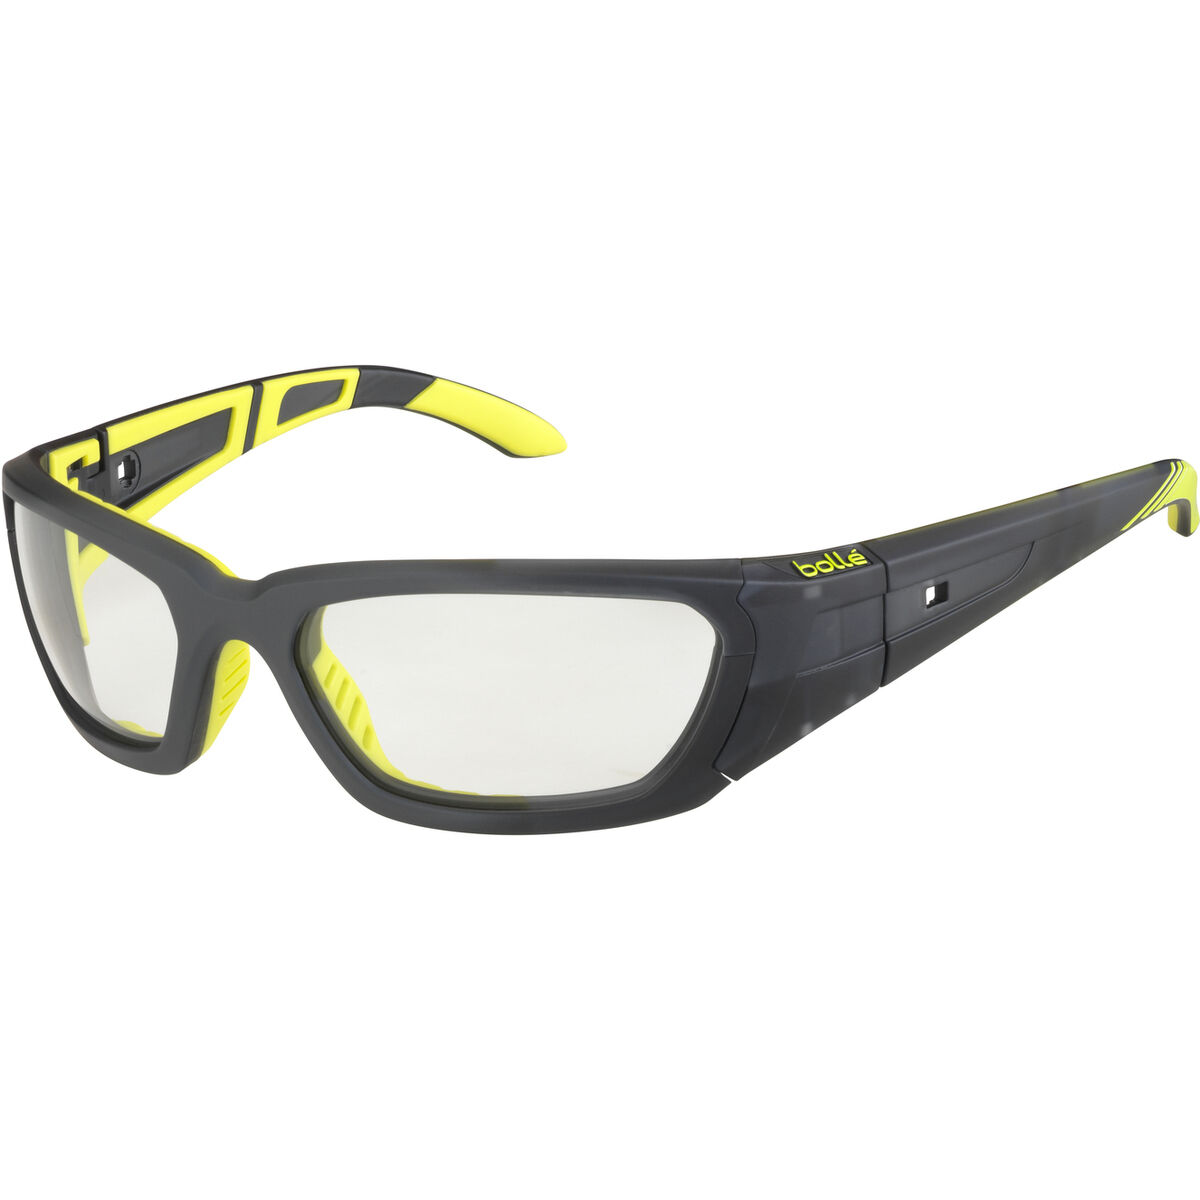 Bolle Tracker sports safety glasses goggles with yellow lens strap and arms 